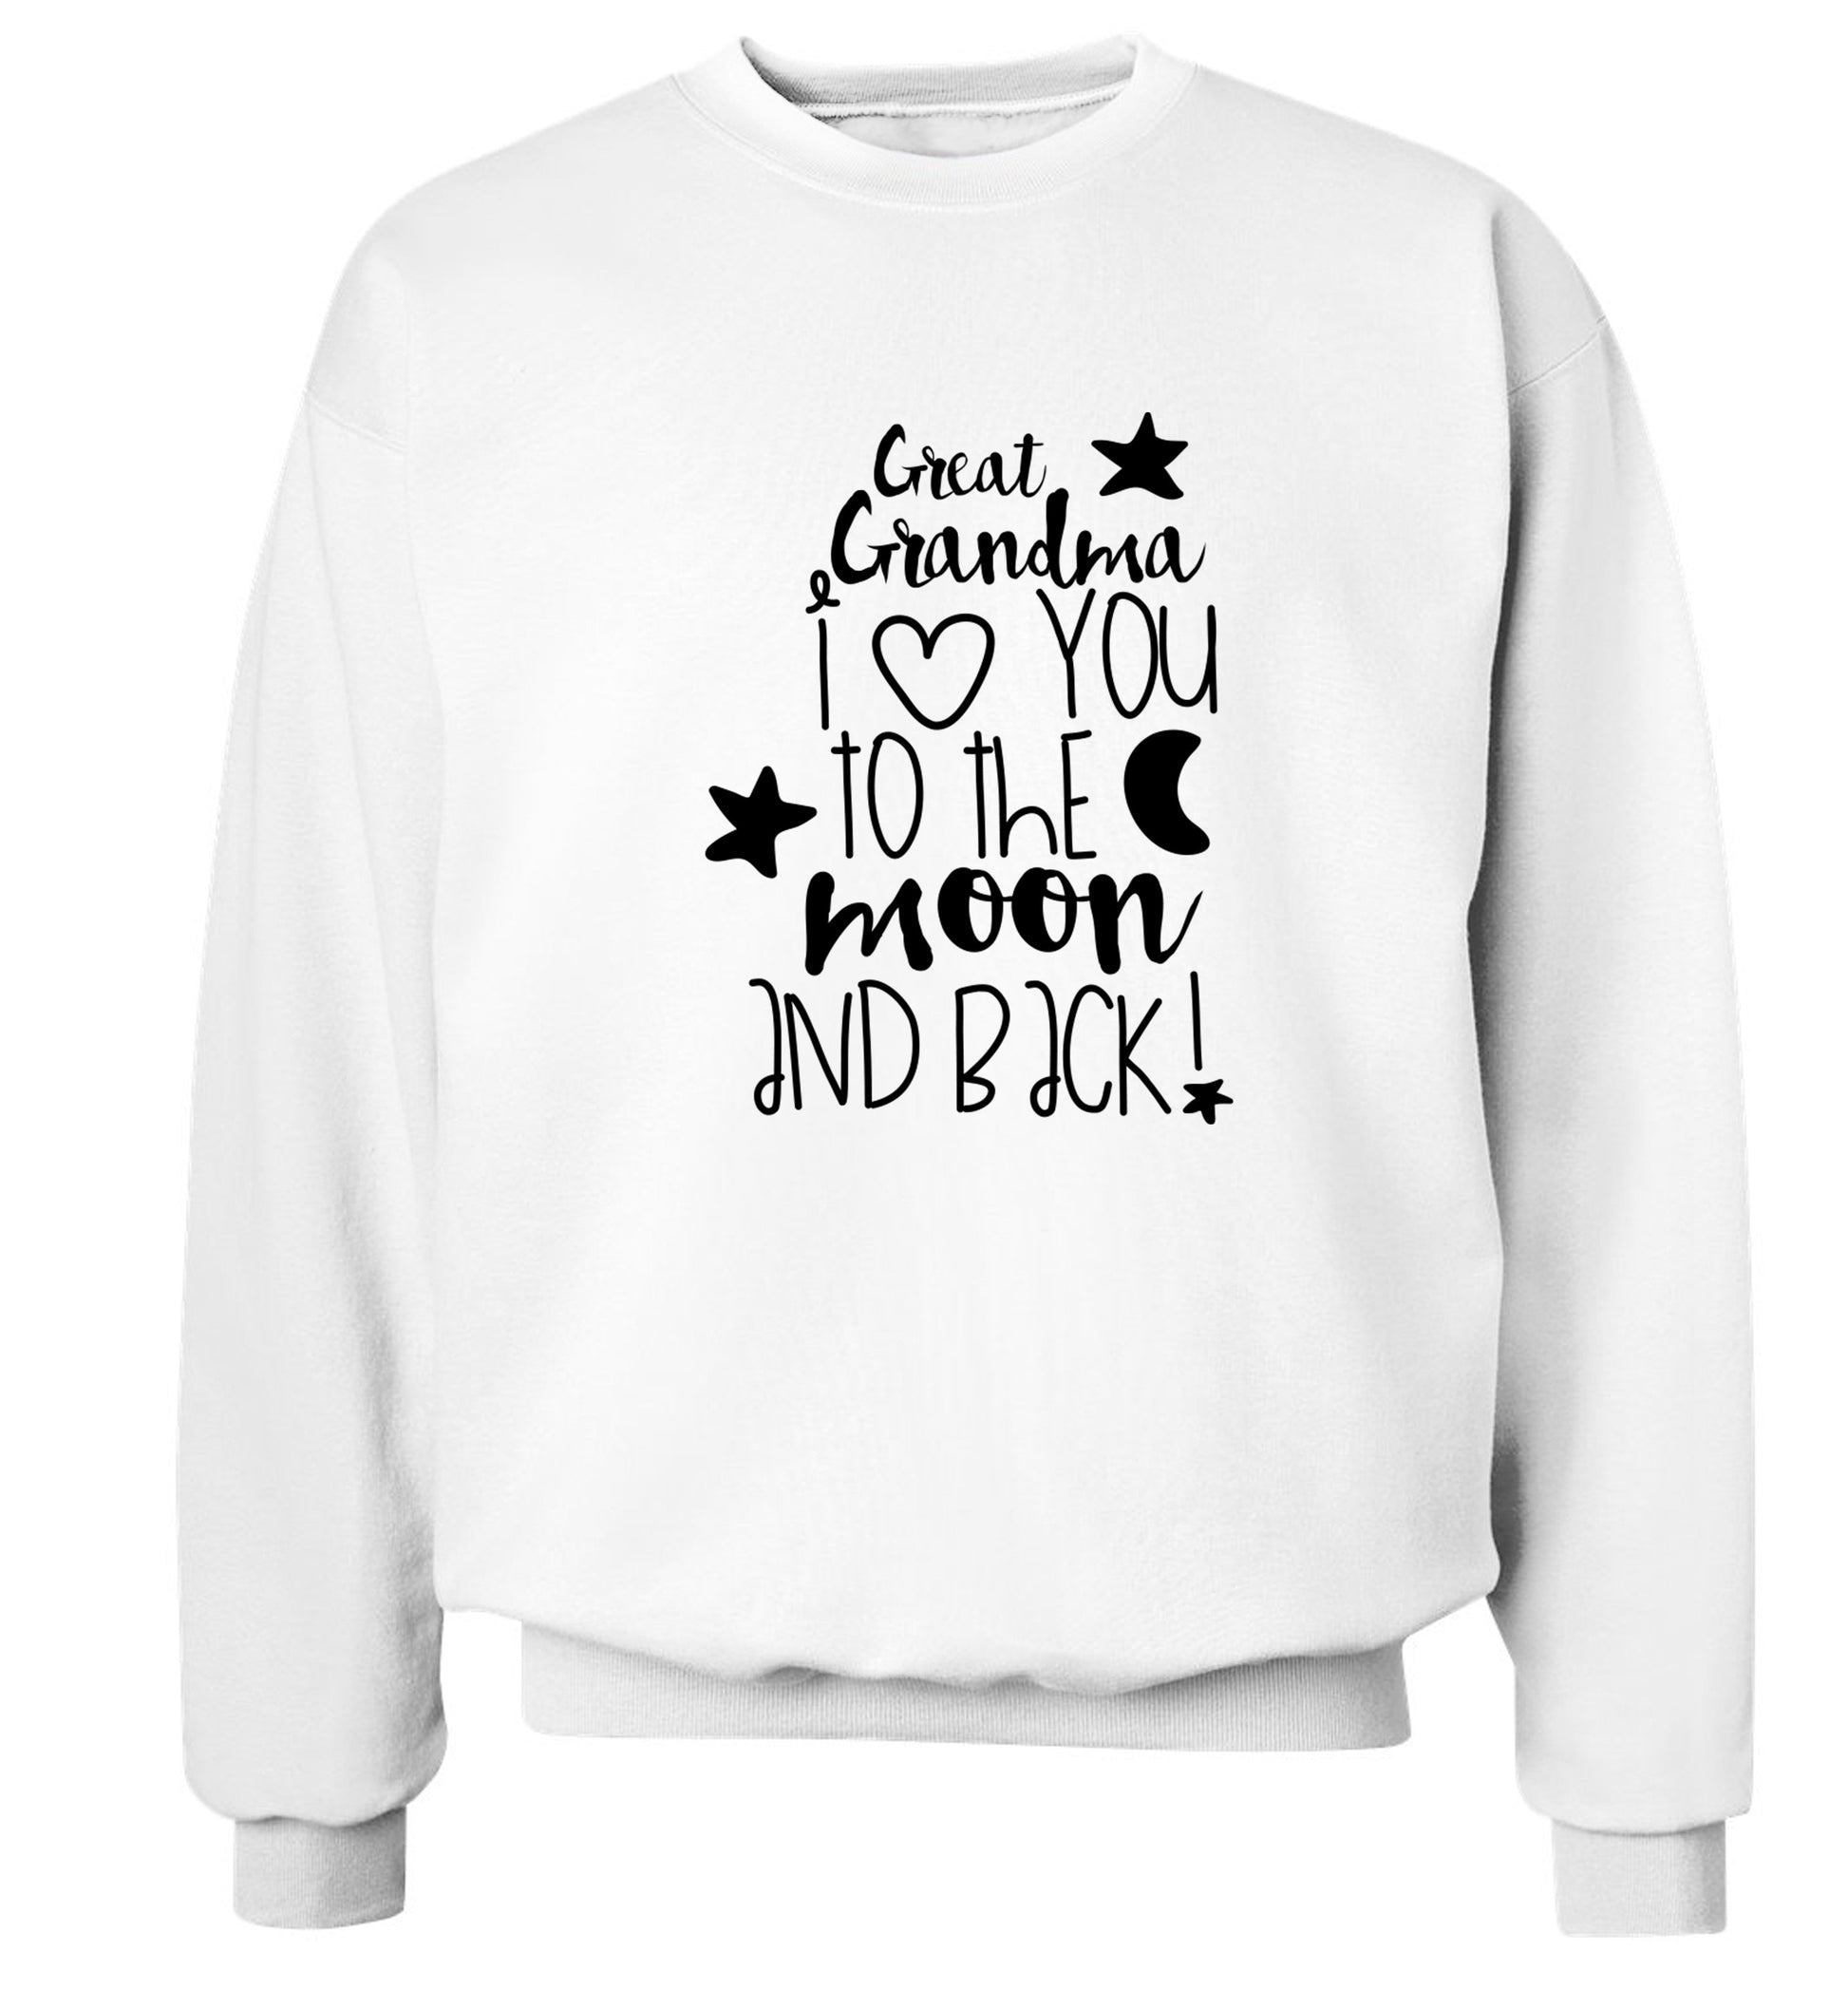 Great Grandma I love you to the moon and back Adult's unisex white  sweater 2XL